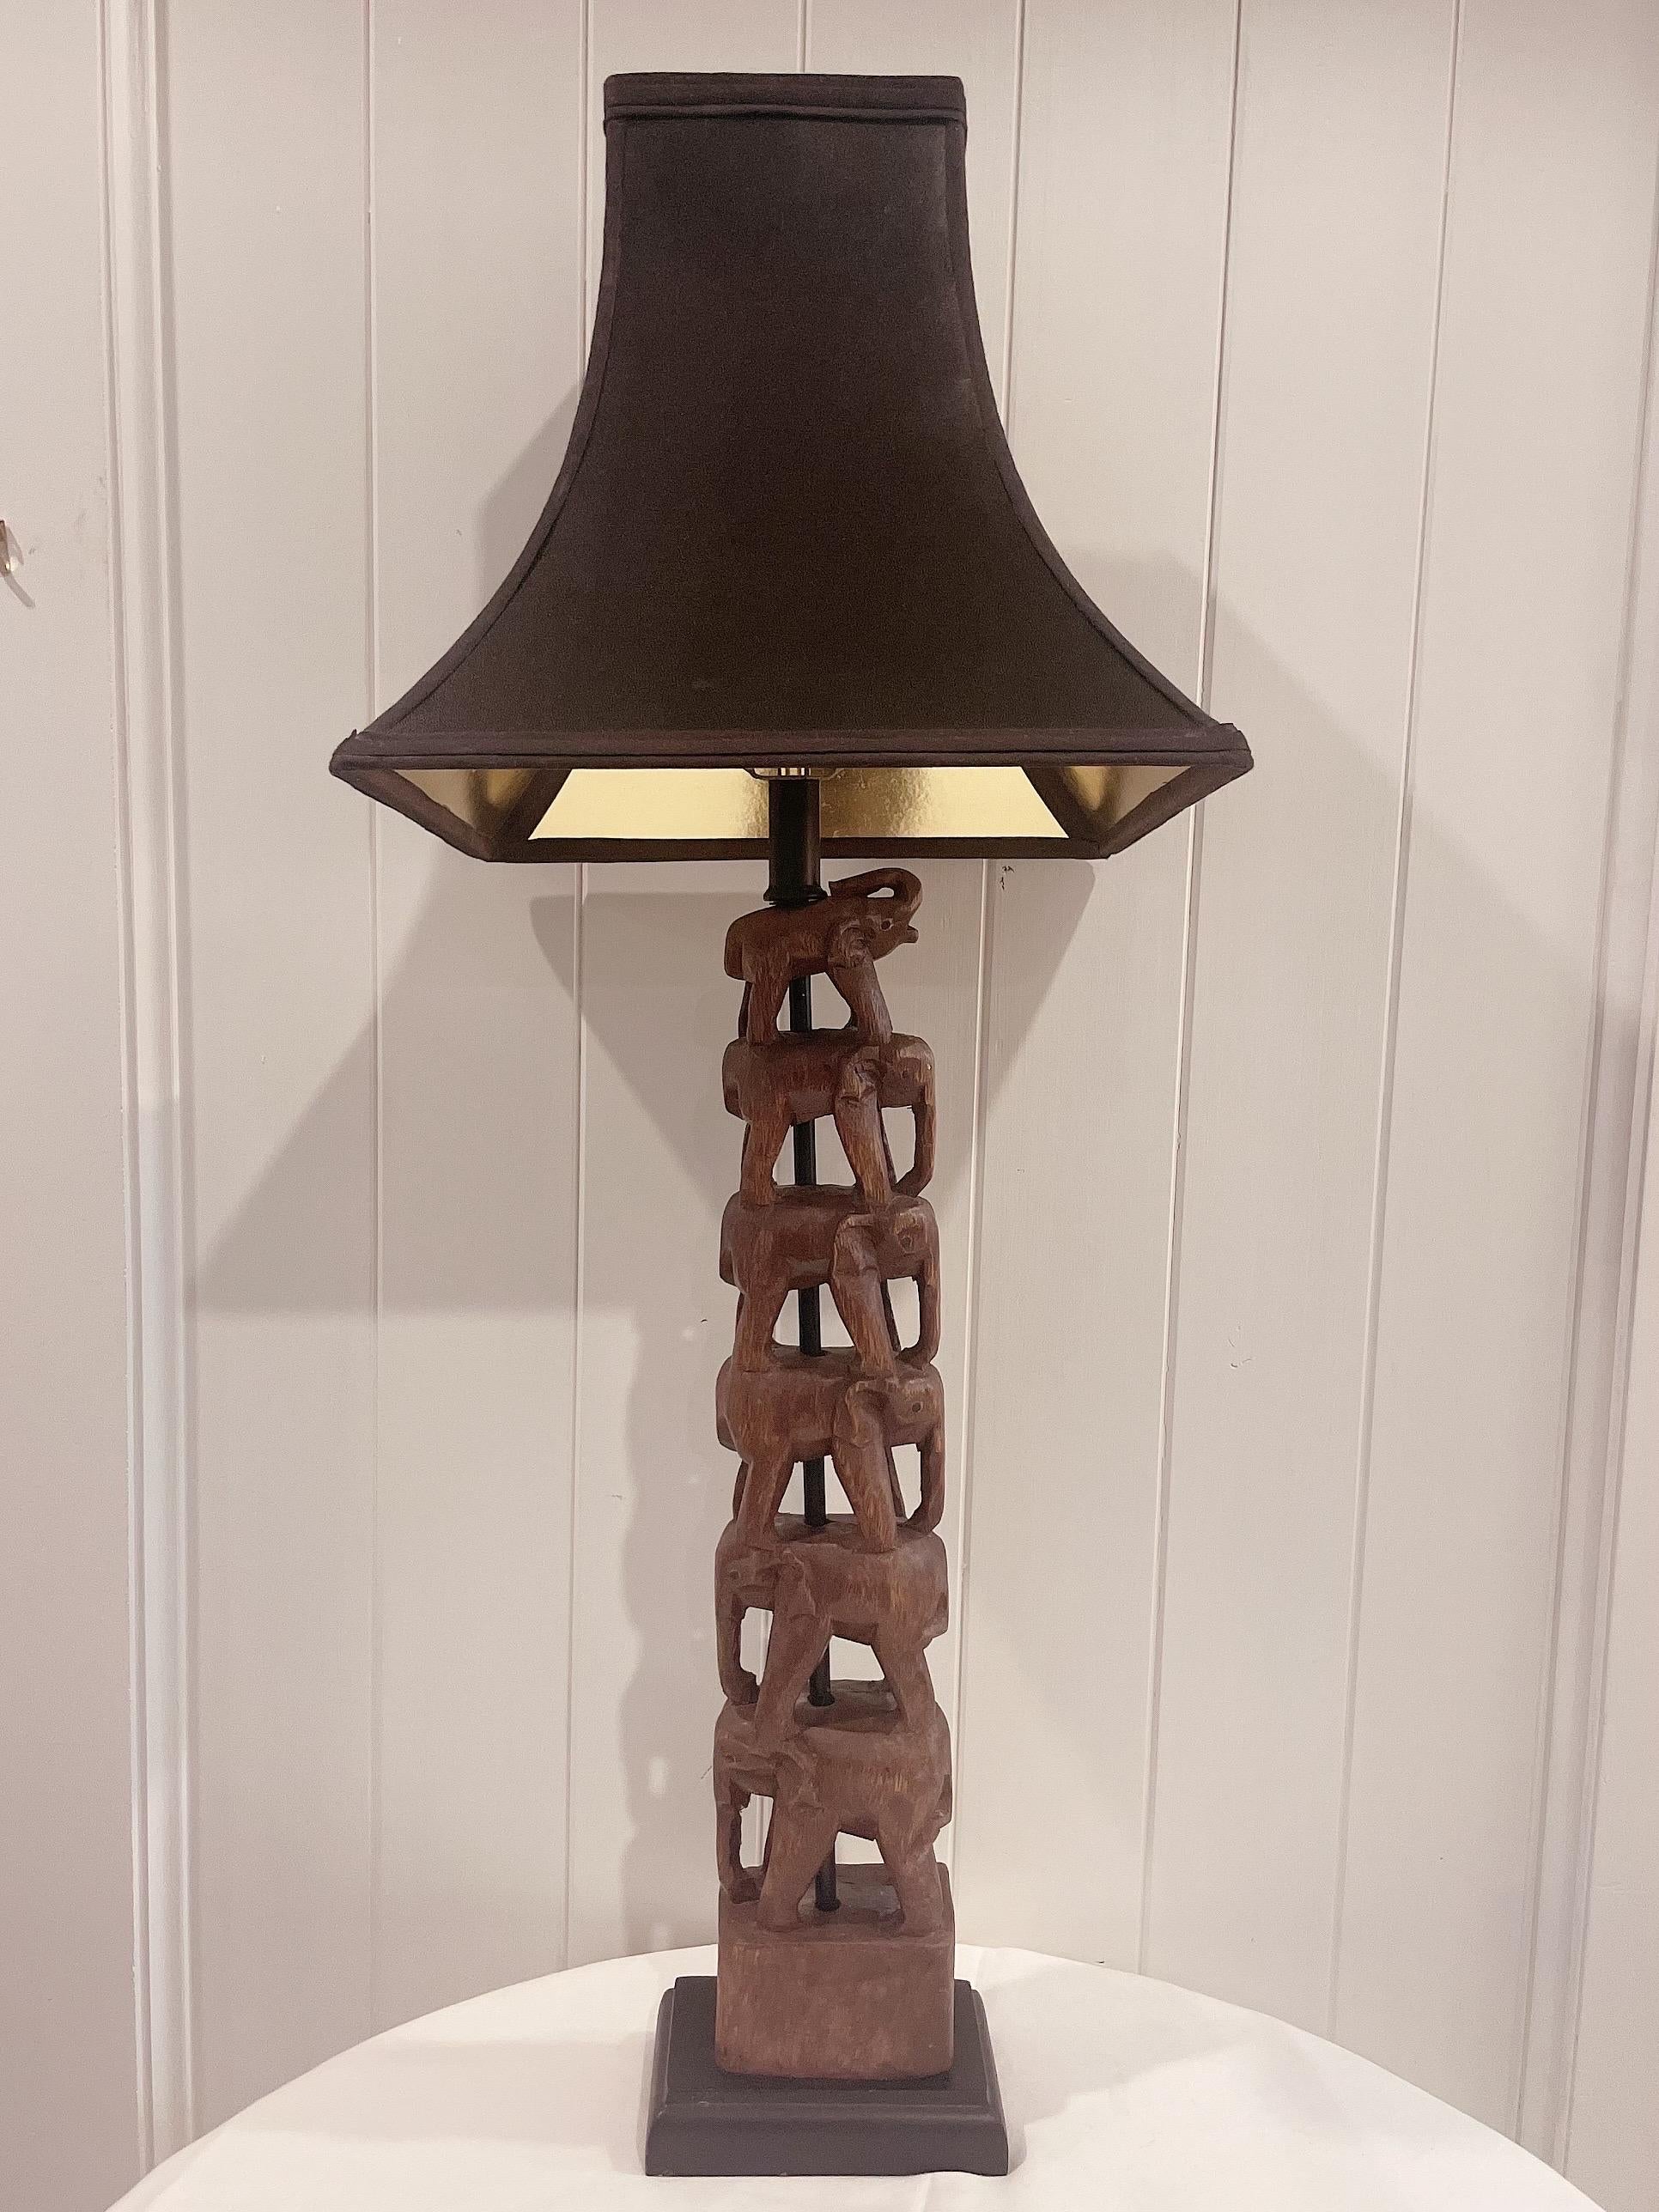 20th Century Carved Stacked Elephant Totem Lamp 1980s Attributed to Frederick Cooper For Sale